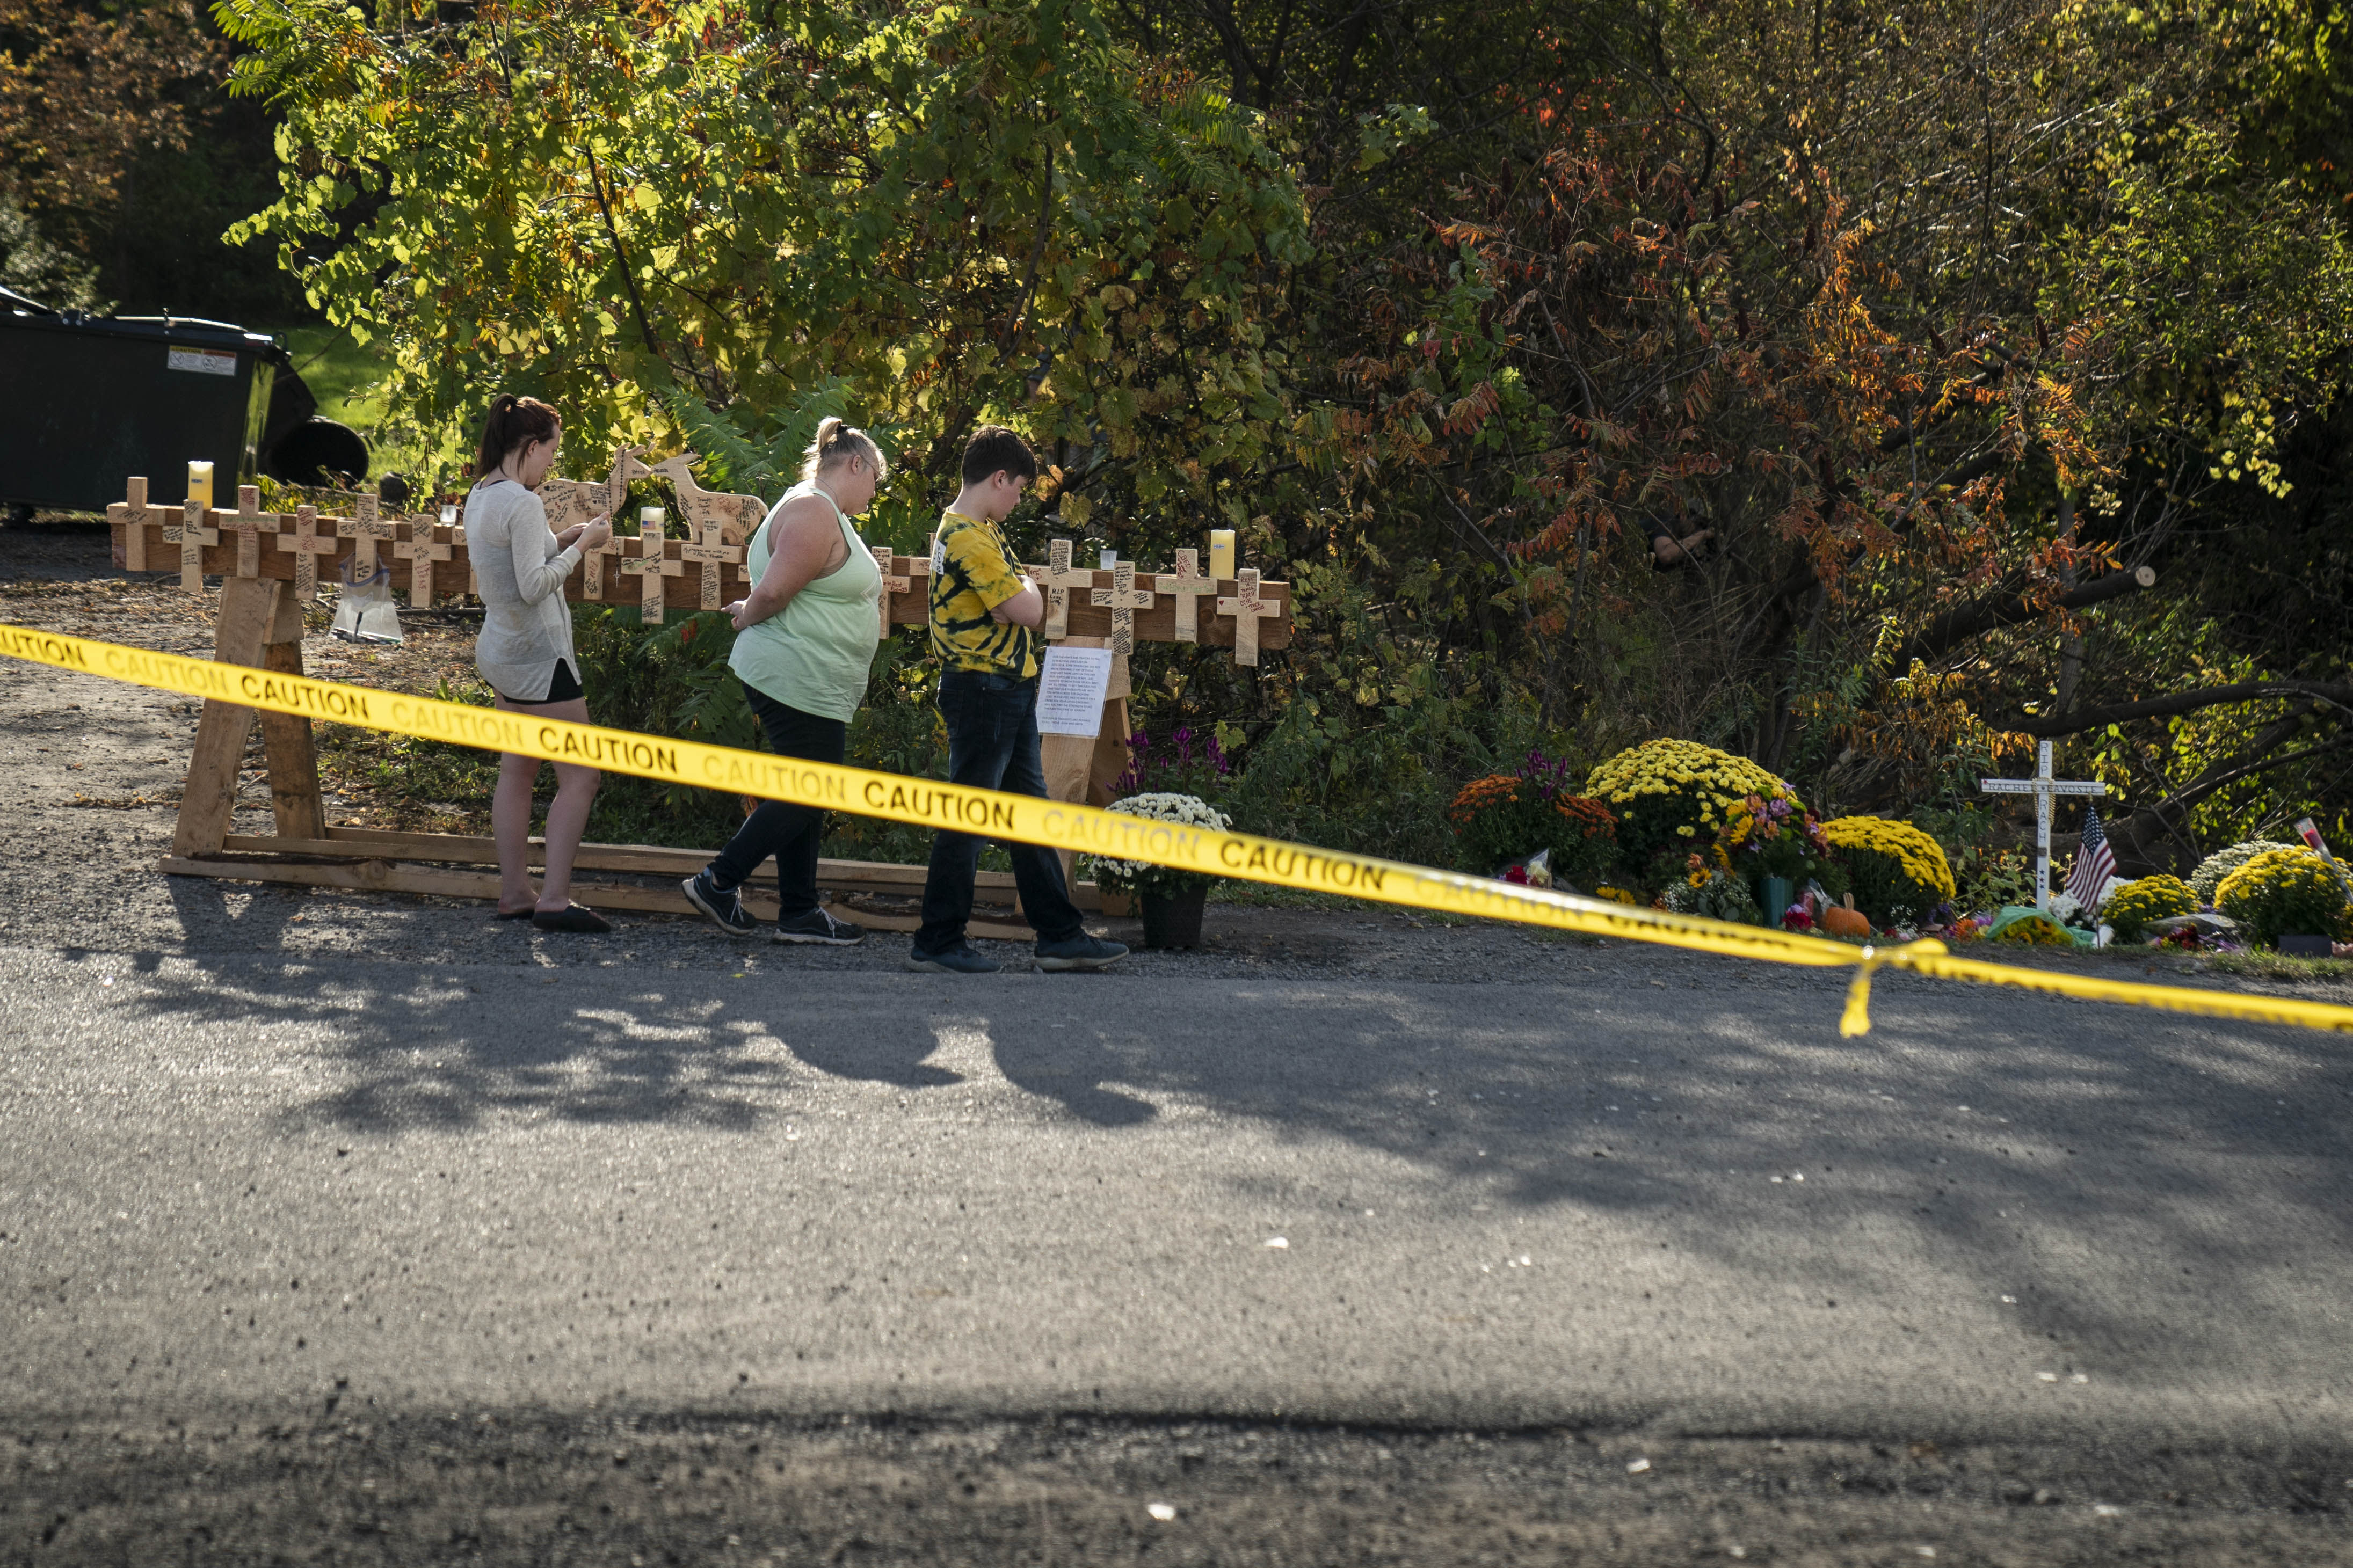 Mourners visit the site of a fatal limousine crash that killed 20 people near the intersection of Route 30 South and Route 30A, October 10, 2018 in Schoharie, New York. Photo by Drew Angerer/Getty Images